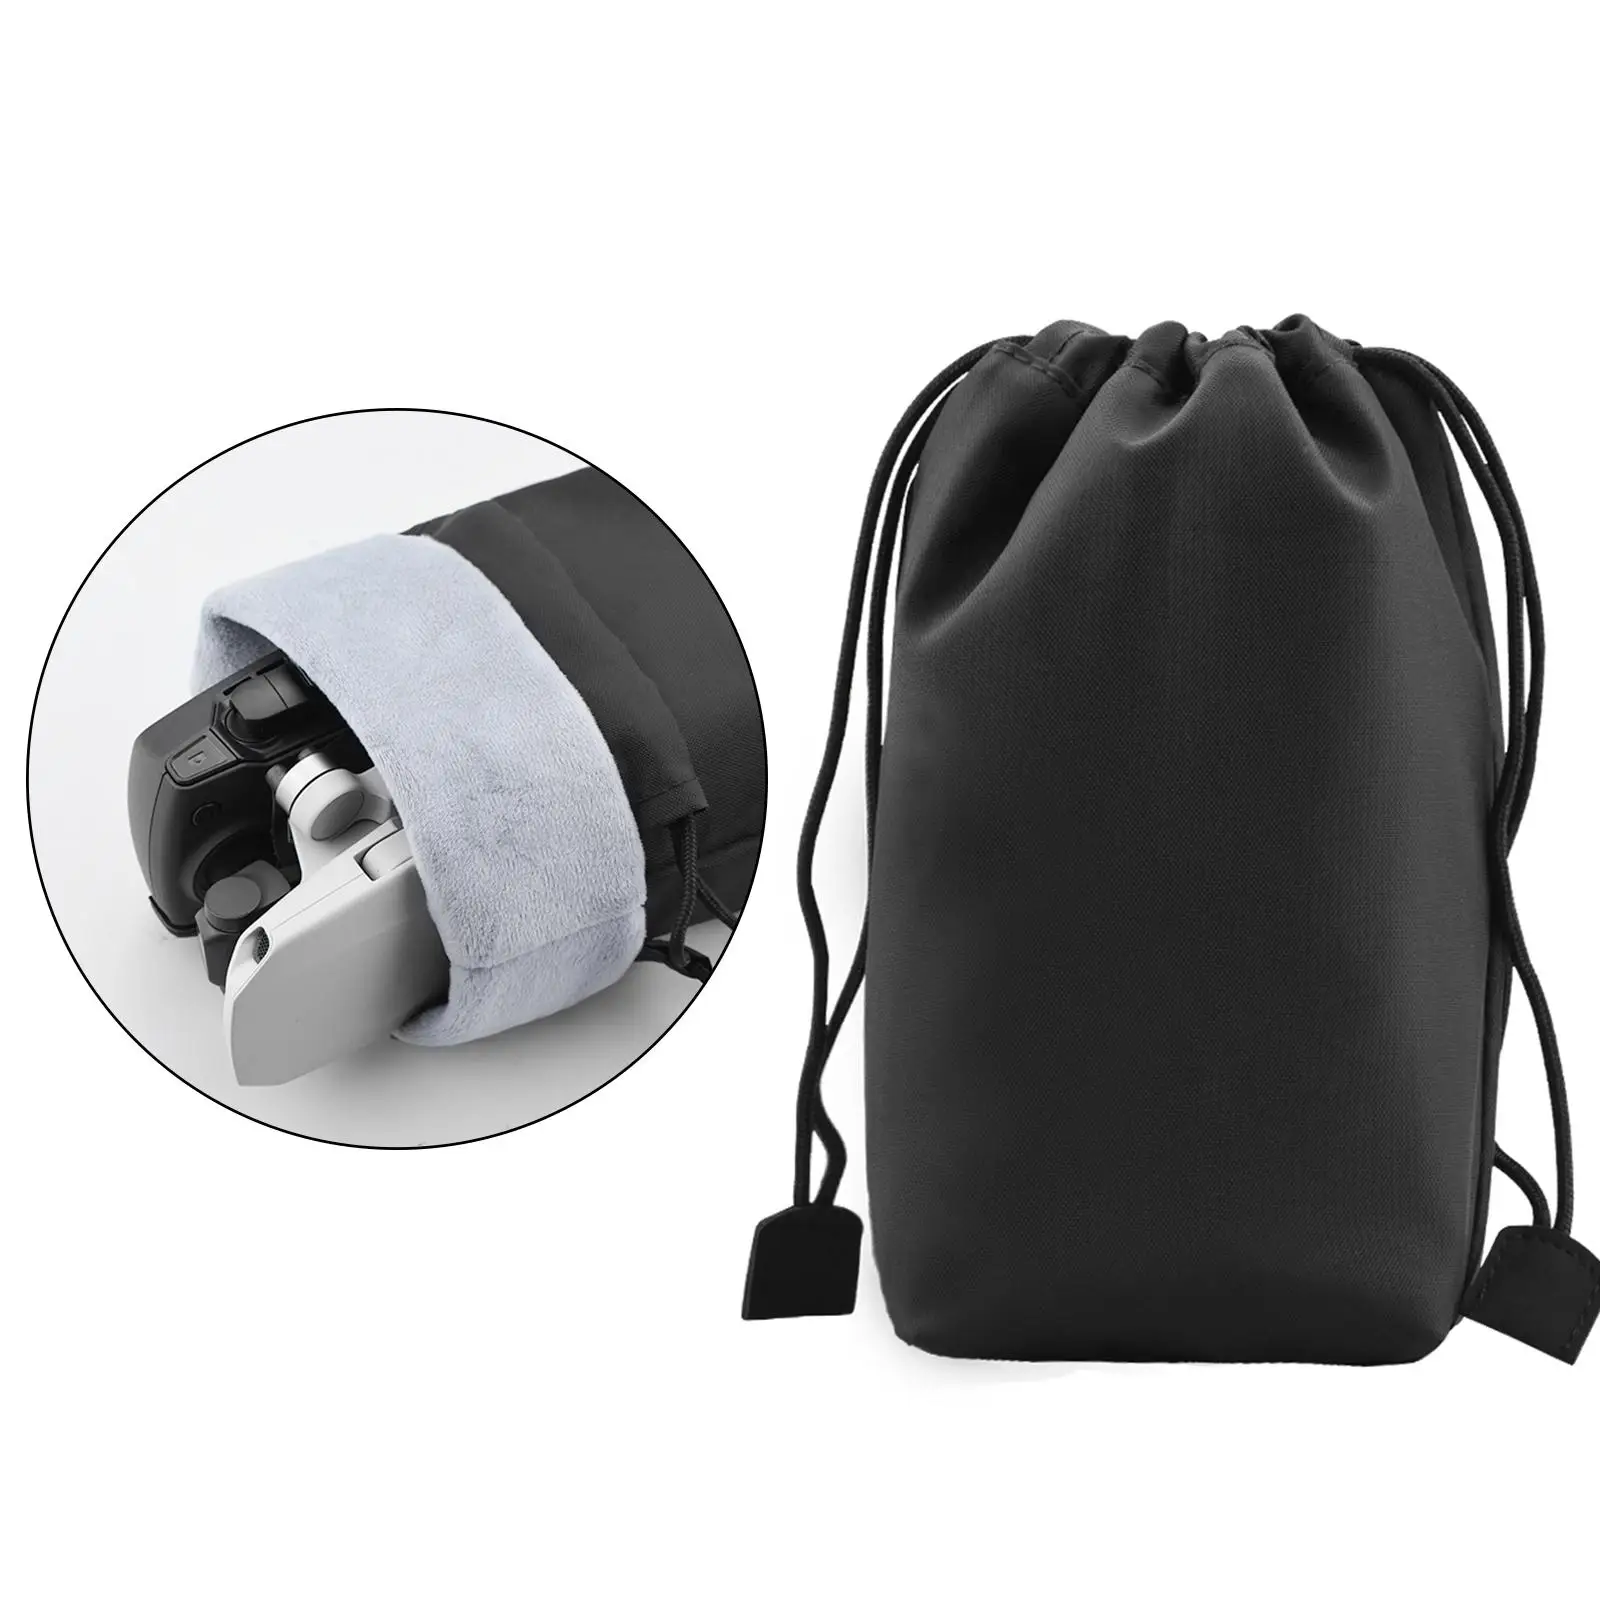 Storage Bag Handbag Carrying Pouch Drawstring for 1 / 2 /  /  / S RC  Parts Travel